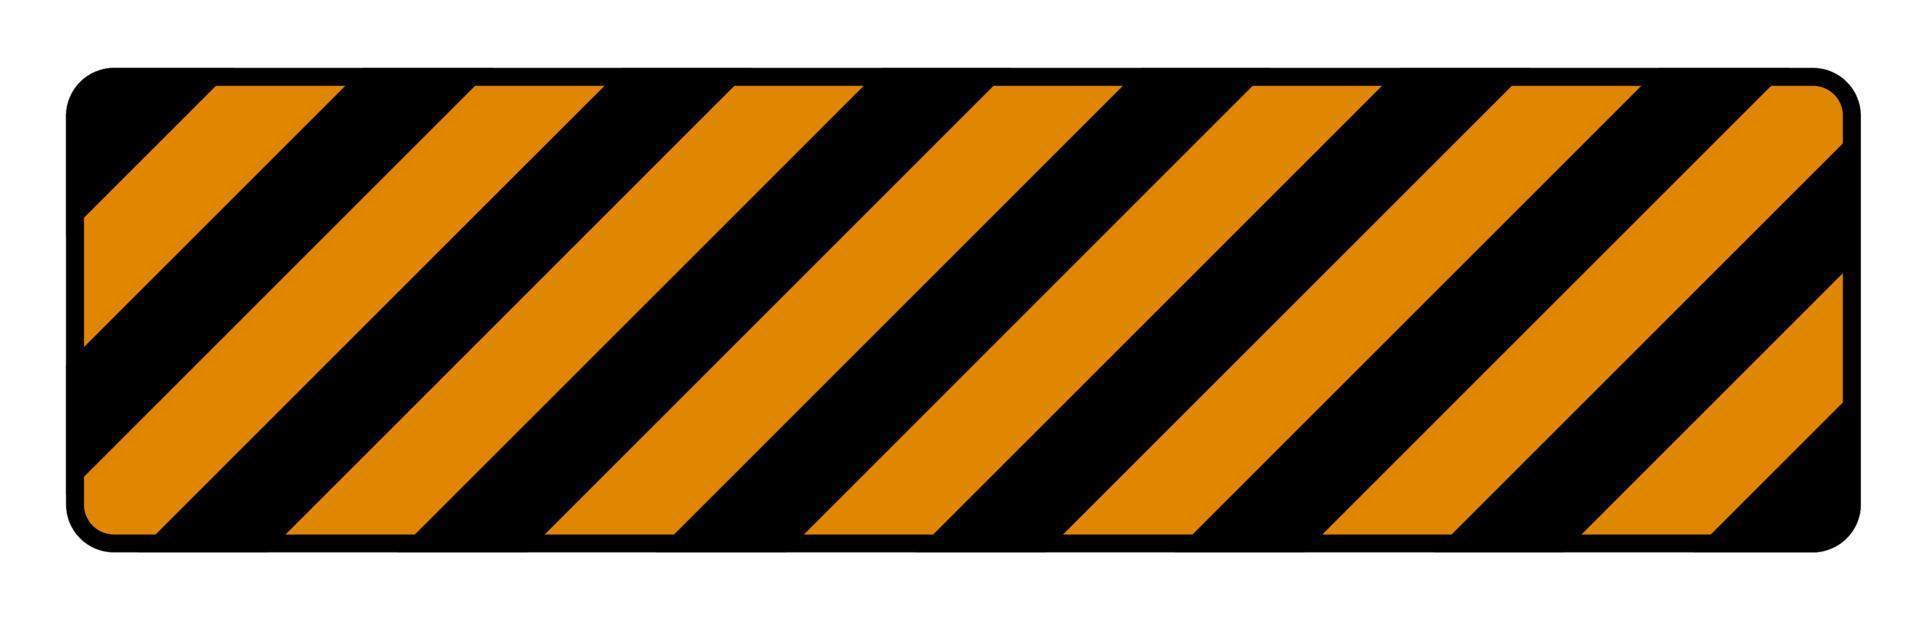 Grey Black Striped Floor Sign On White Background vector